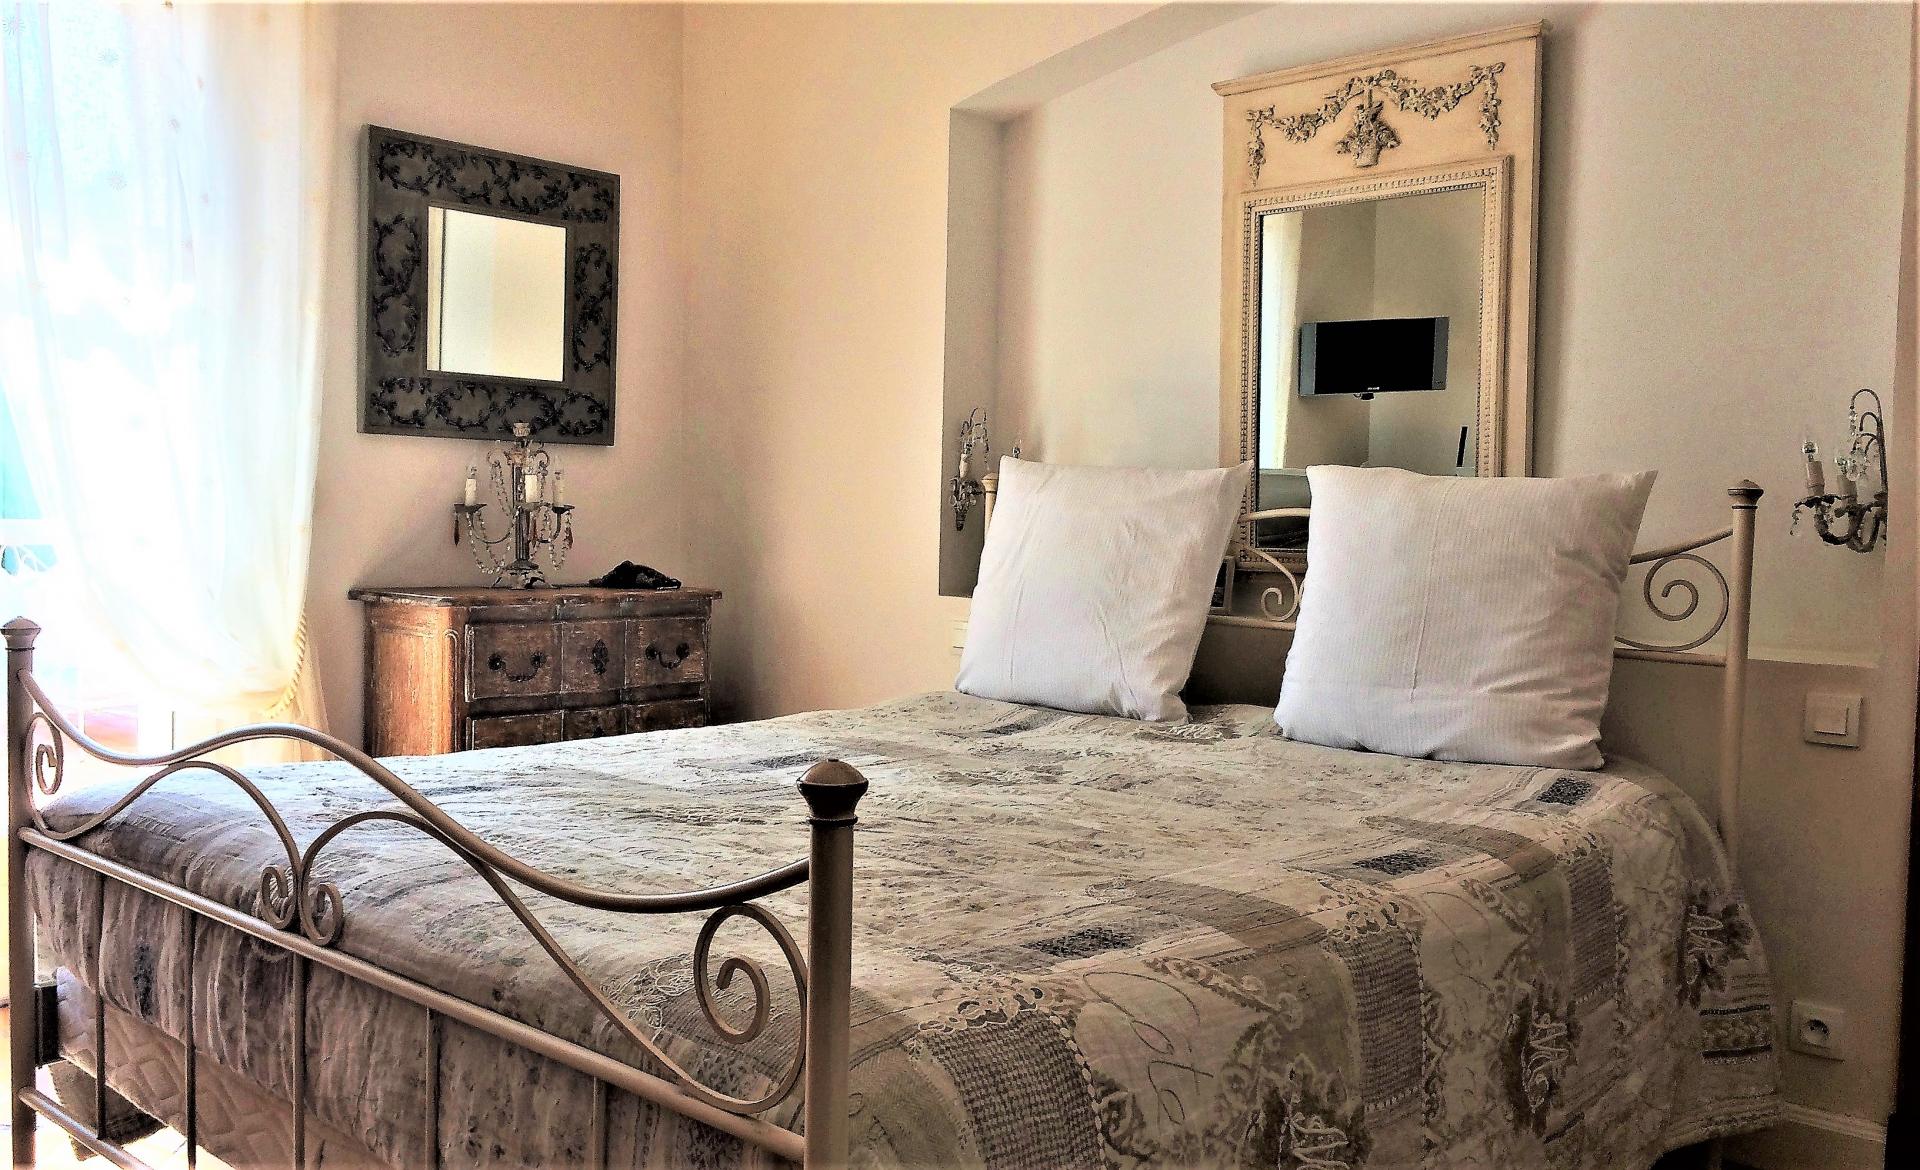 THE PROVENCAL STYLE GIVES A NICE ATMOSPHERE TO THE BEDROOM